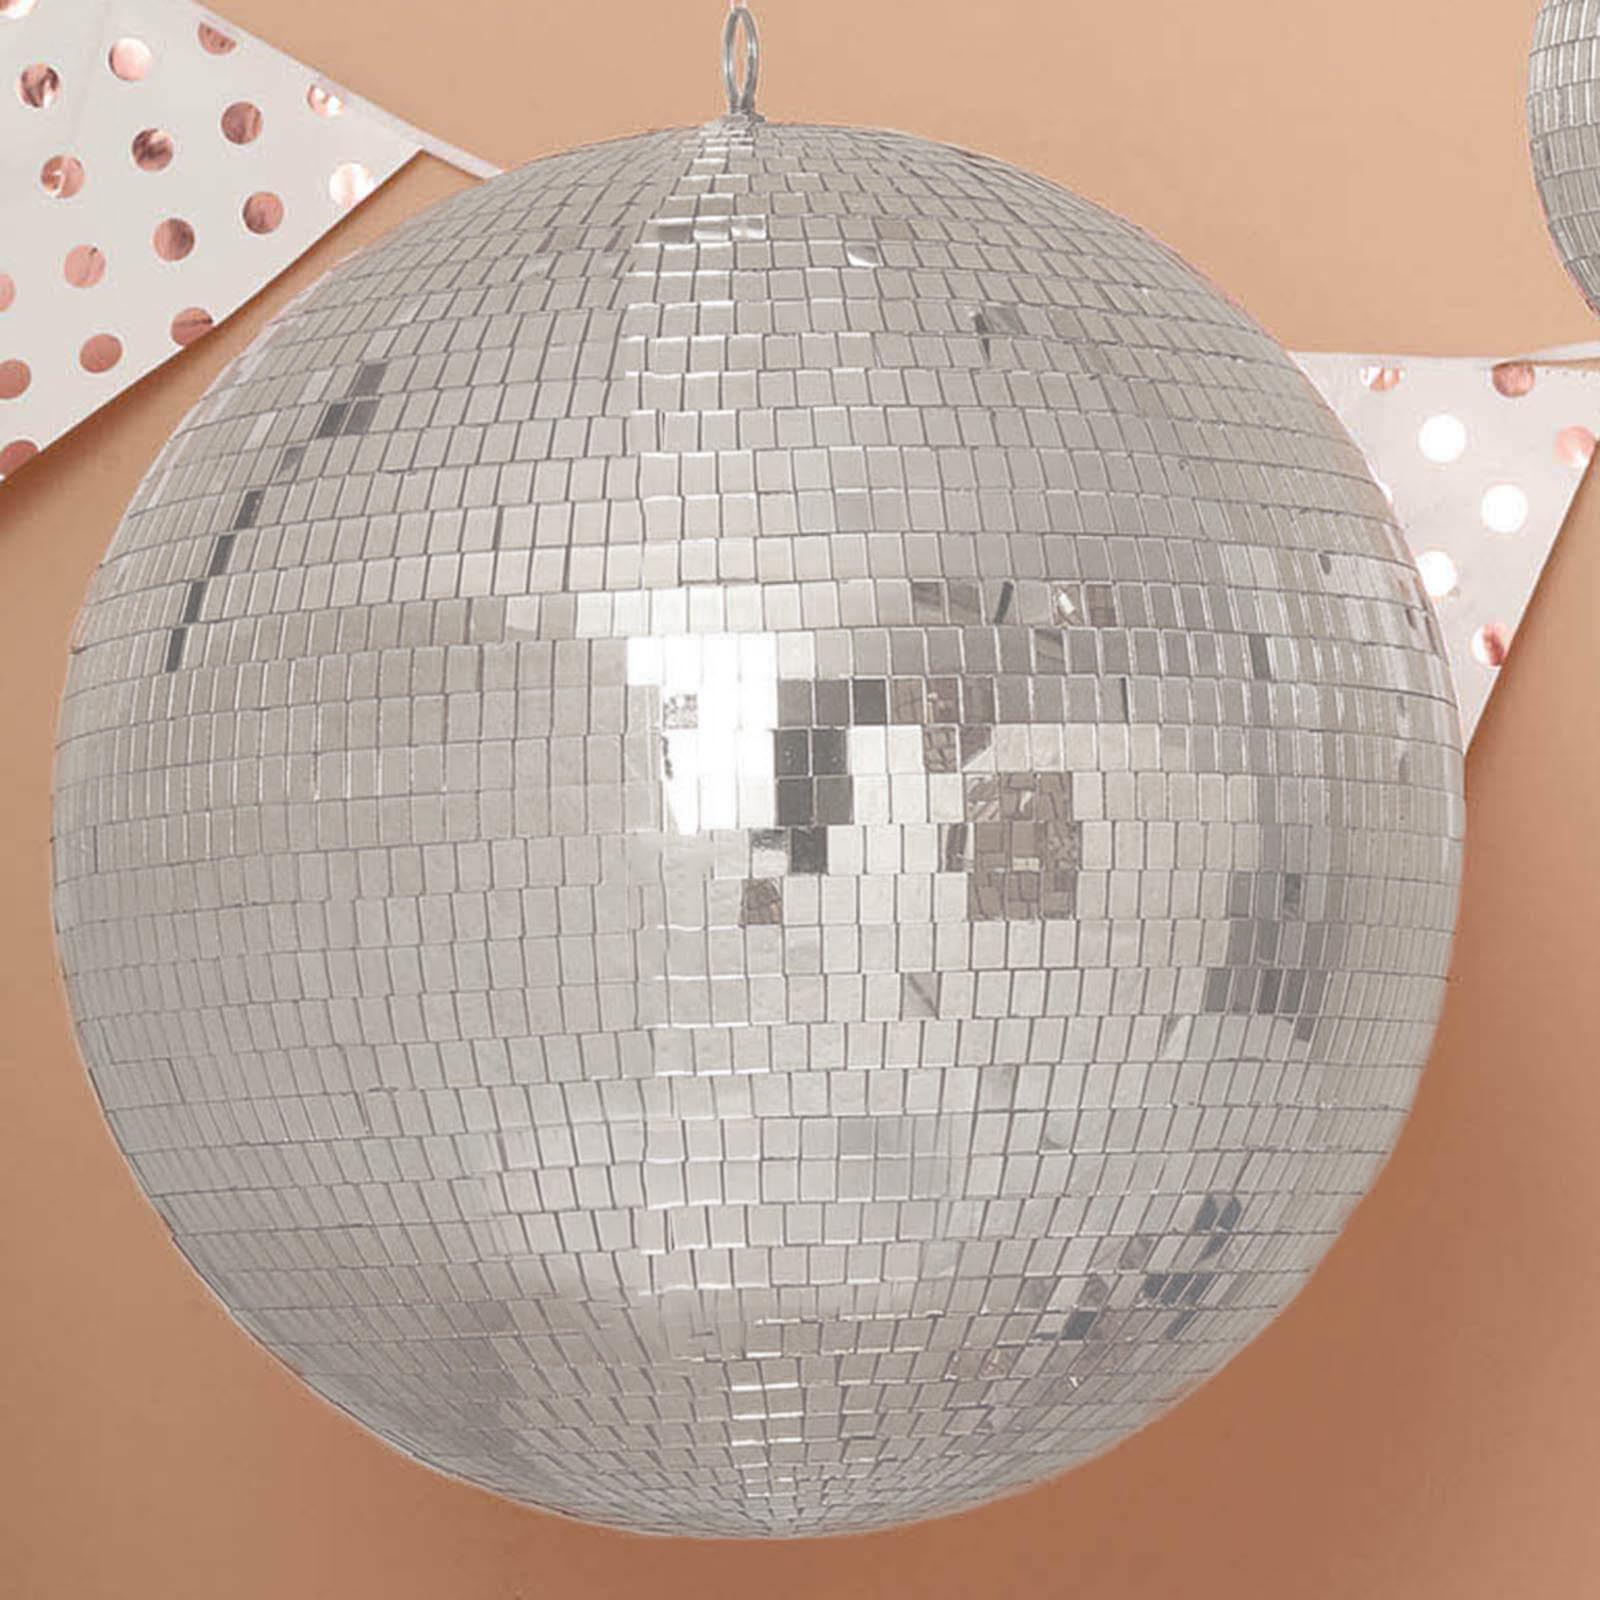 20 inch DISCO BALL 4D HOLOGRAPHIC